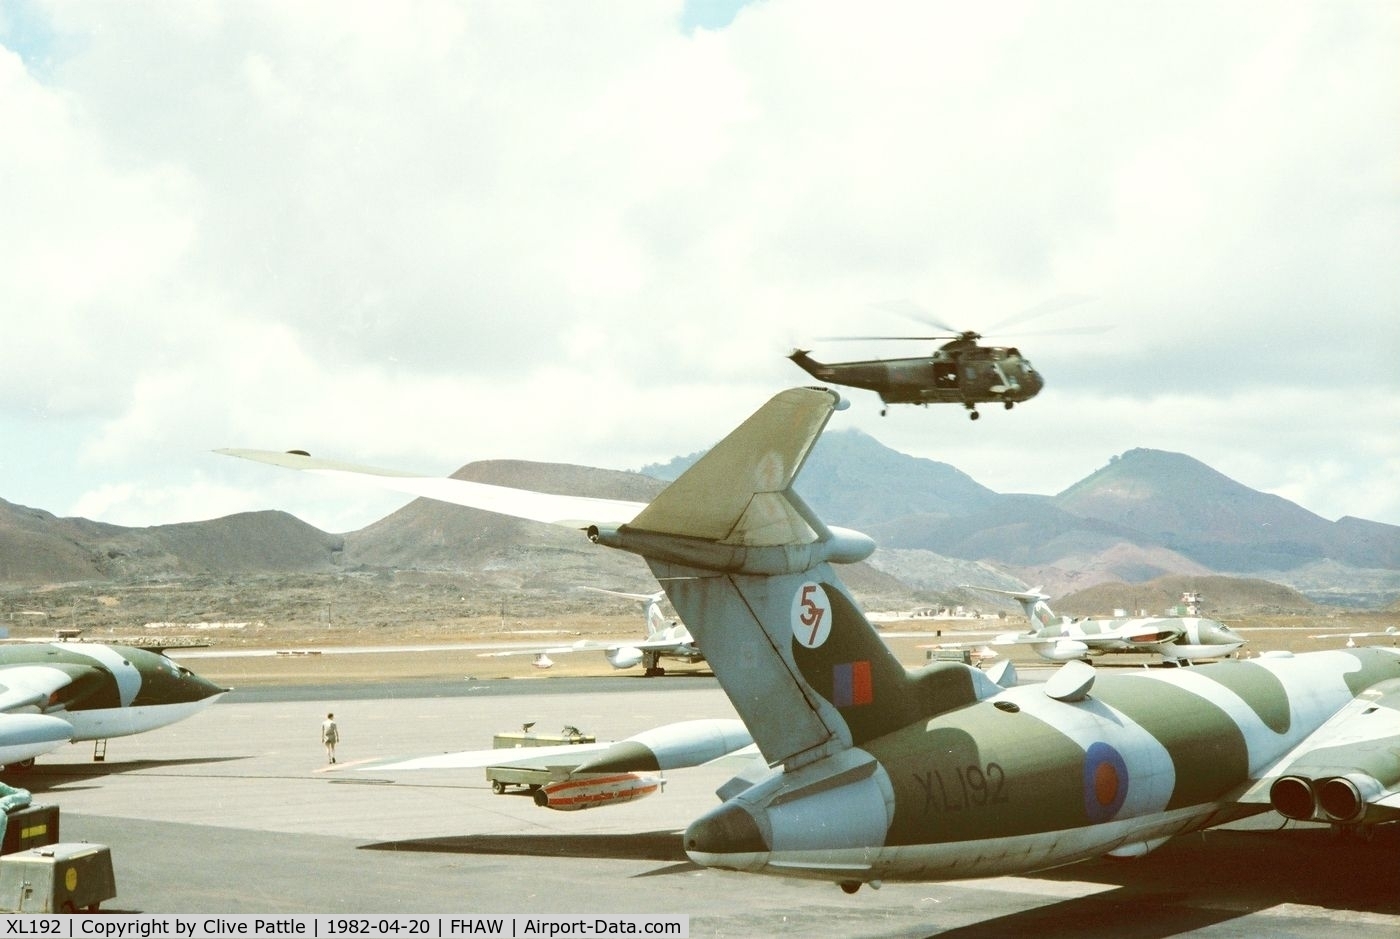 XL192, 1962 Handley Page Victor K.2 C/N HP80/73, HP.80 Victor K.2 XL192 of 57 Sqn RAF seen pictured with others from its Sqn at Wideawake airfield, Ascension Island, April 1982 during the Falklands War.